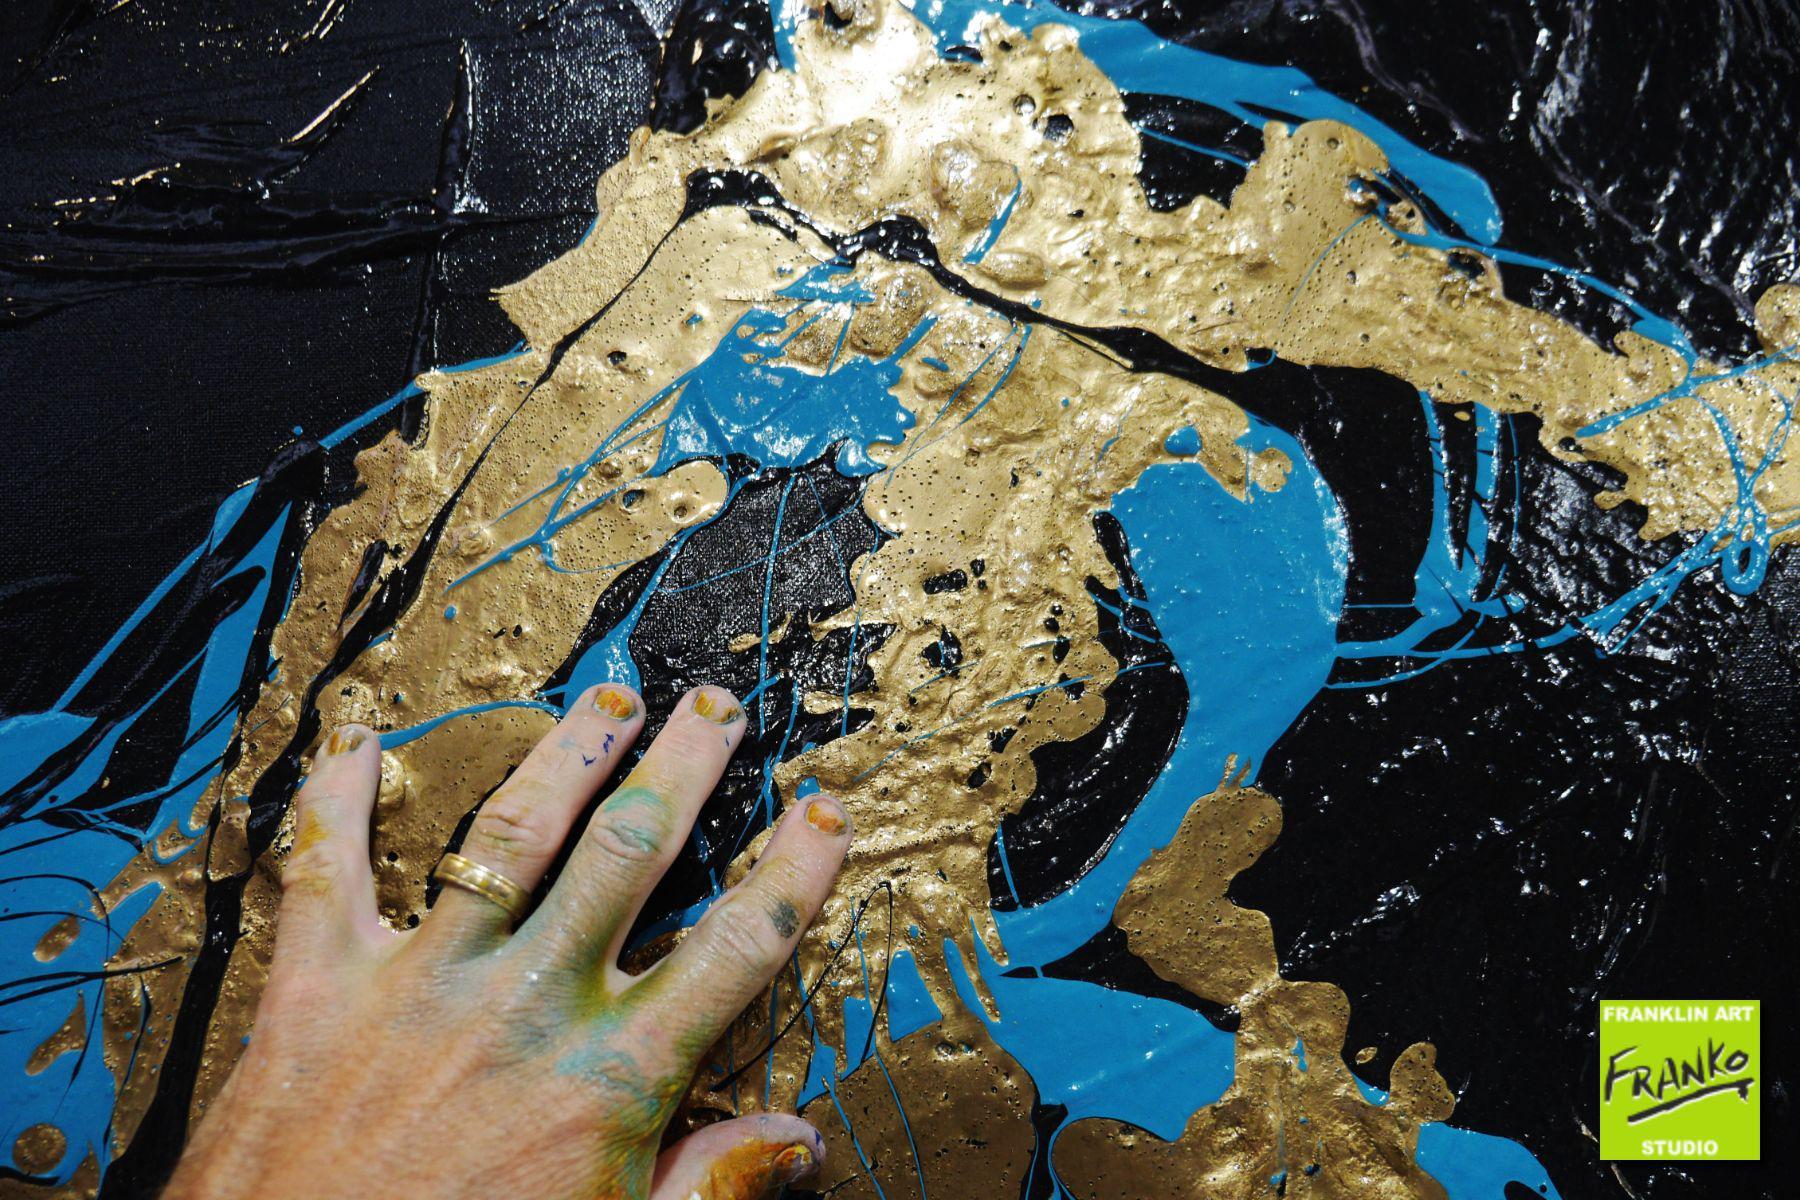 Jade Breath 100cm x 100cm Jade Black Gold Textured Abstract Painting (SOLD)